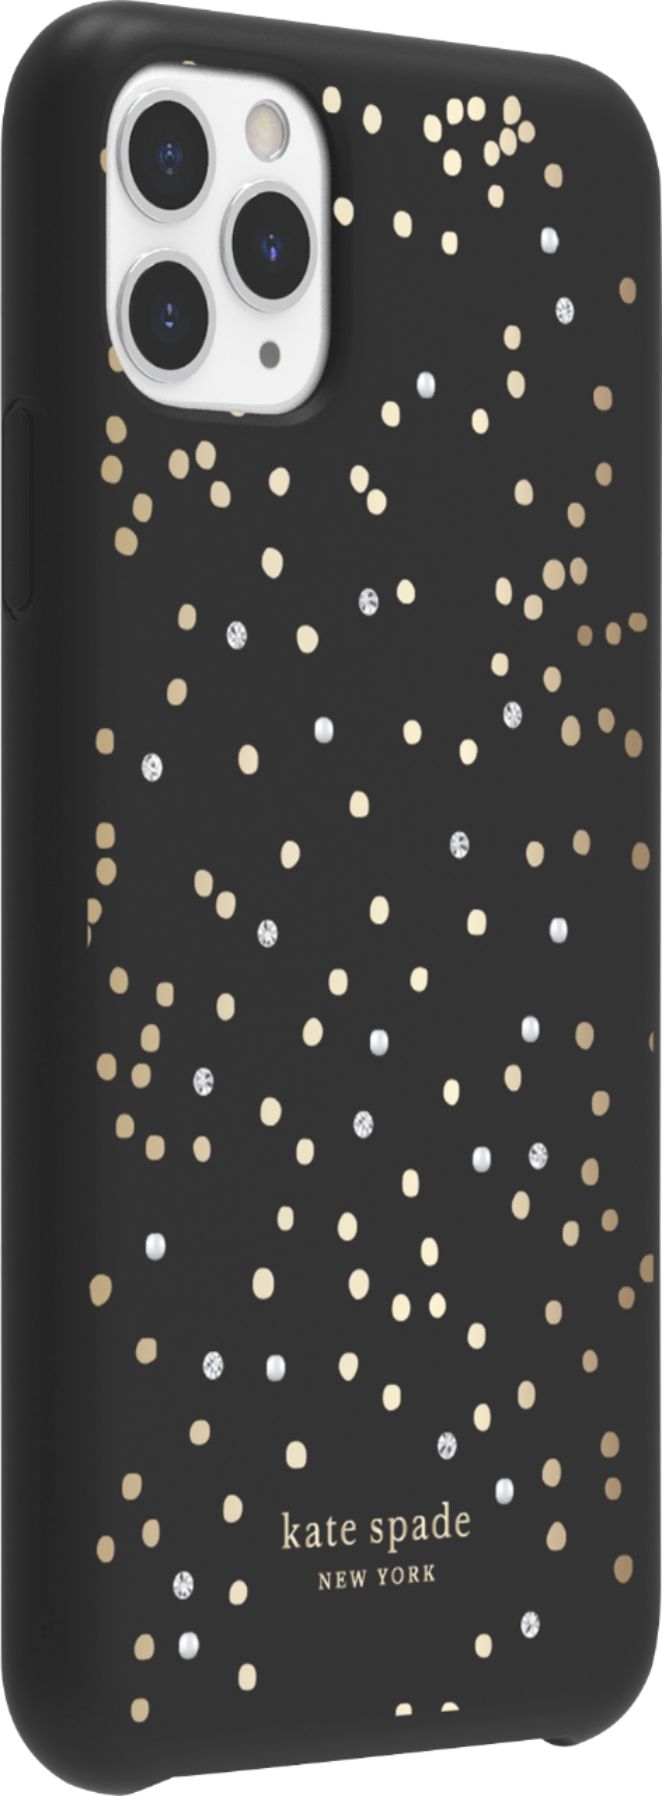 Angle View: kate spade new york - Protective Hard Shell Case for Apple® iPhone® 11 Pro Max - Gold/Crystal Gem/Pearl/Soft Touch Disco Dots Black